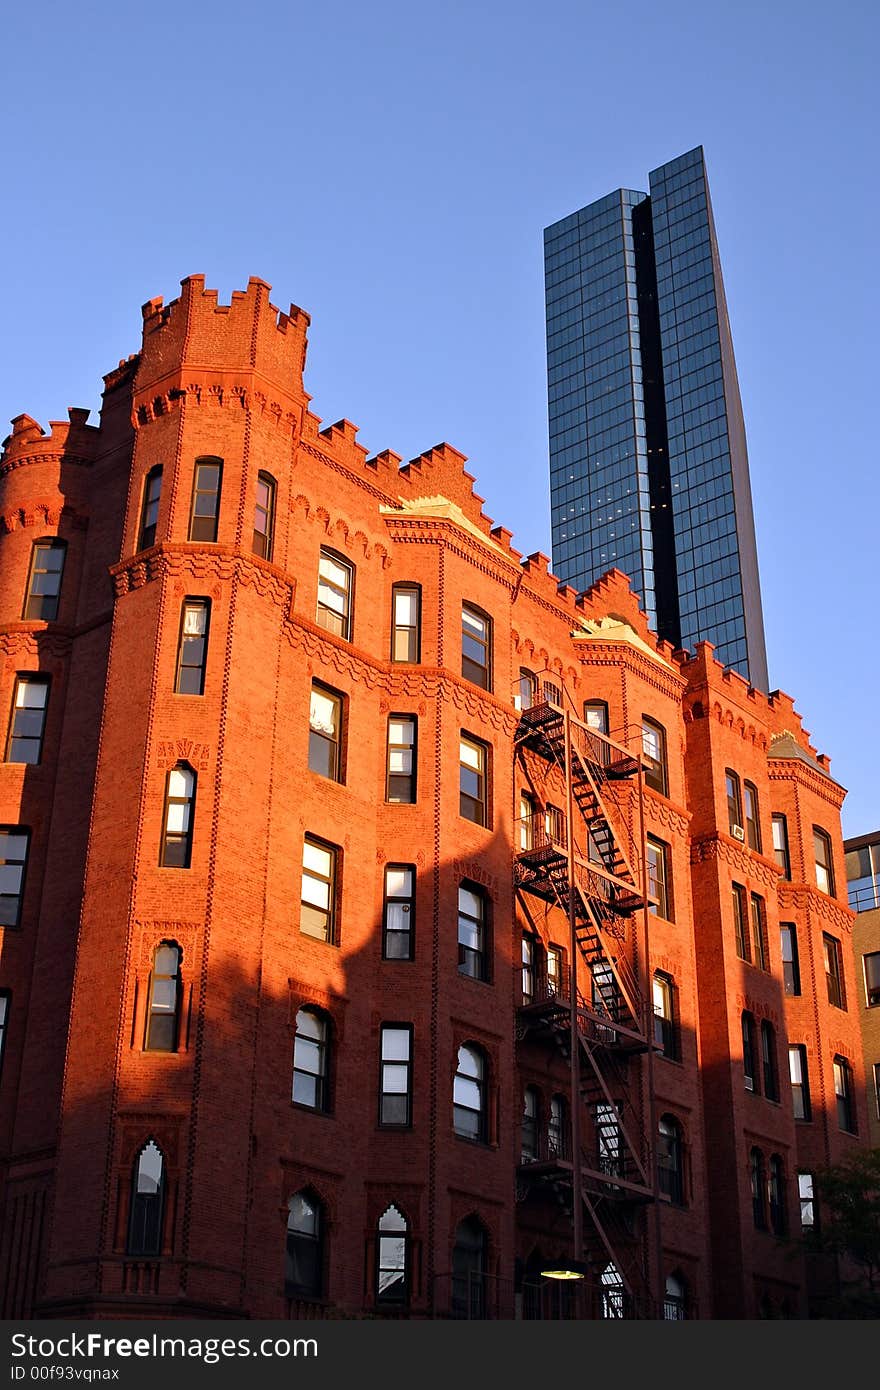 Back Bay and neighboring Beacon Hill are considered Boston's most upscale and desirable neighborhoods. Back Bay and neighboring Beacon Hill are considered Boston's most upscale and desirable neighborhoods